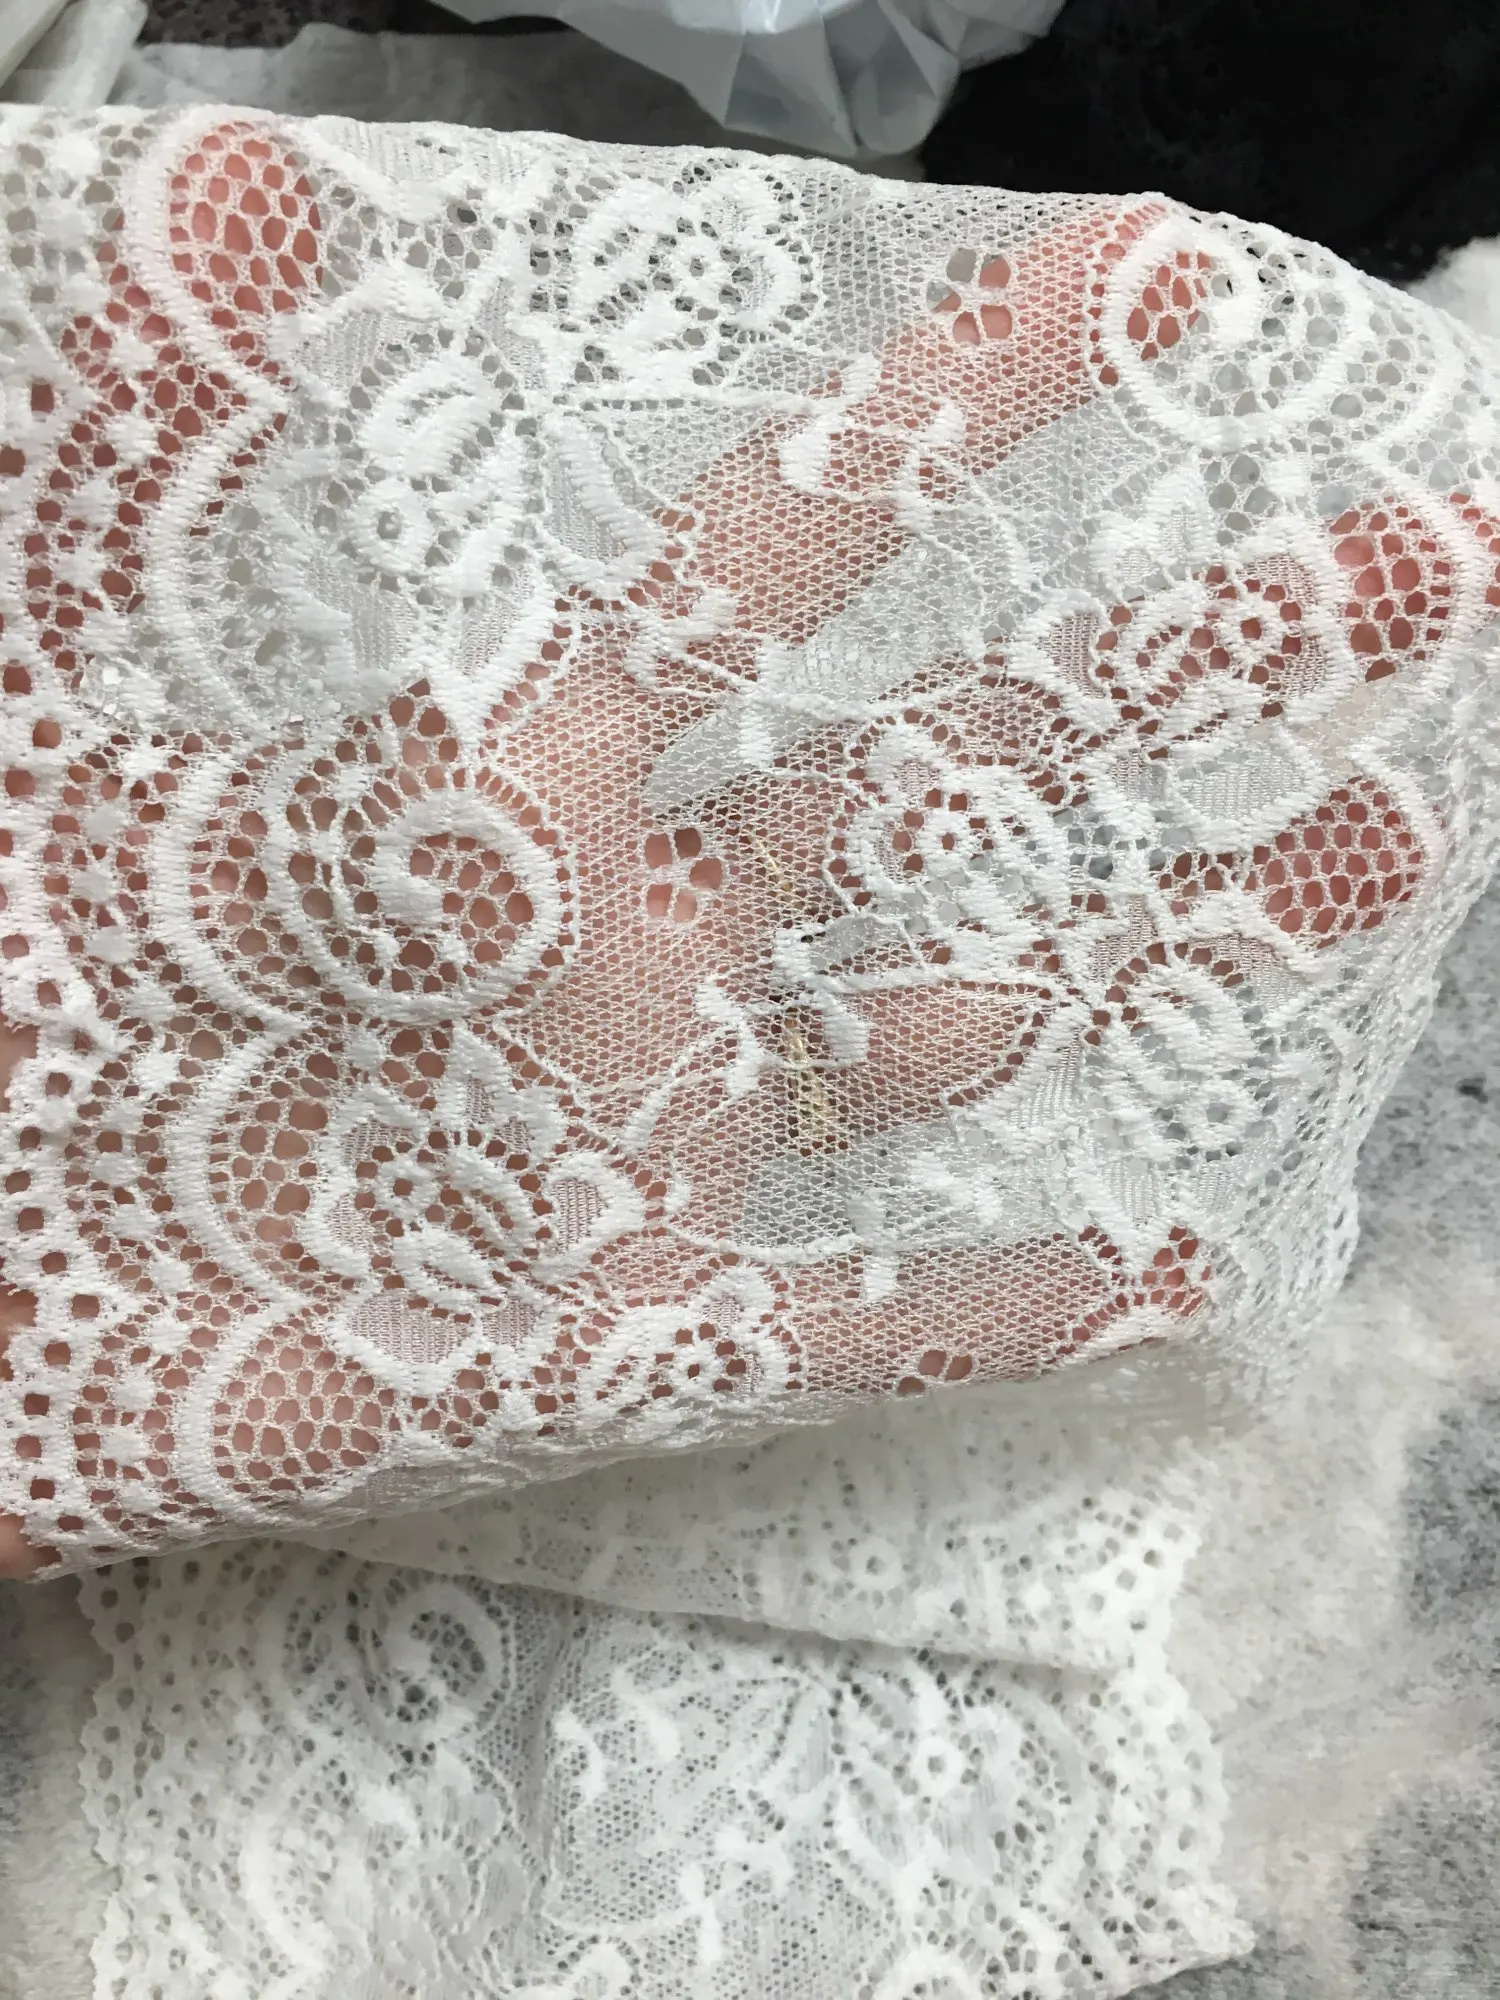 Floral Pattern Cut Work Fabrc 7.62 Wide Trim Crafting Sewing Lace By The Yard 